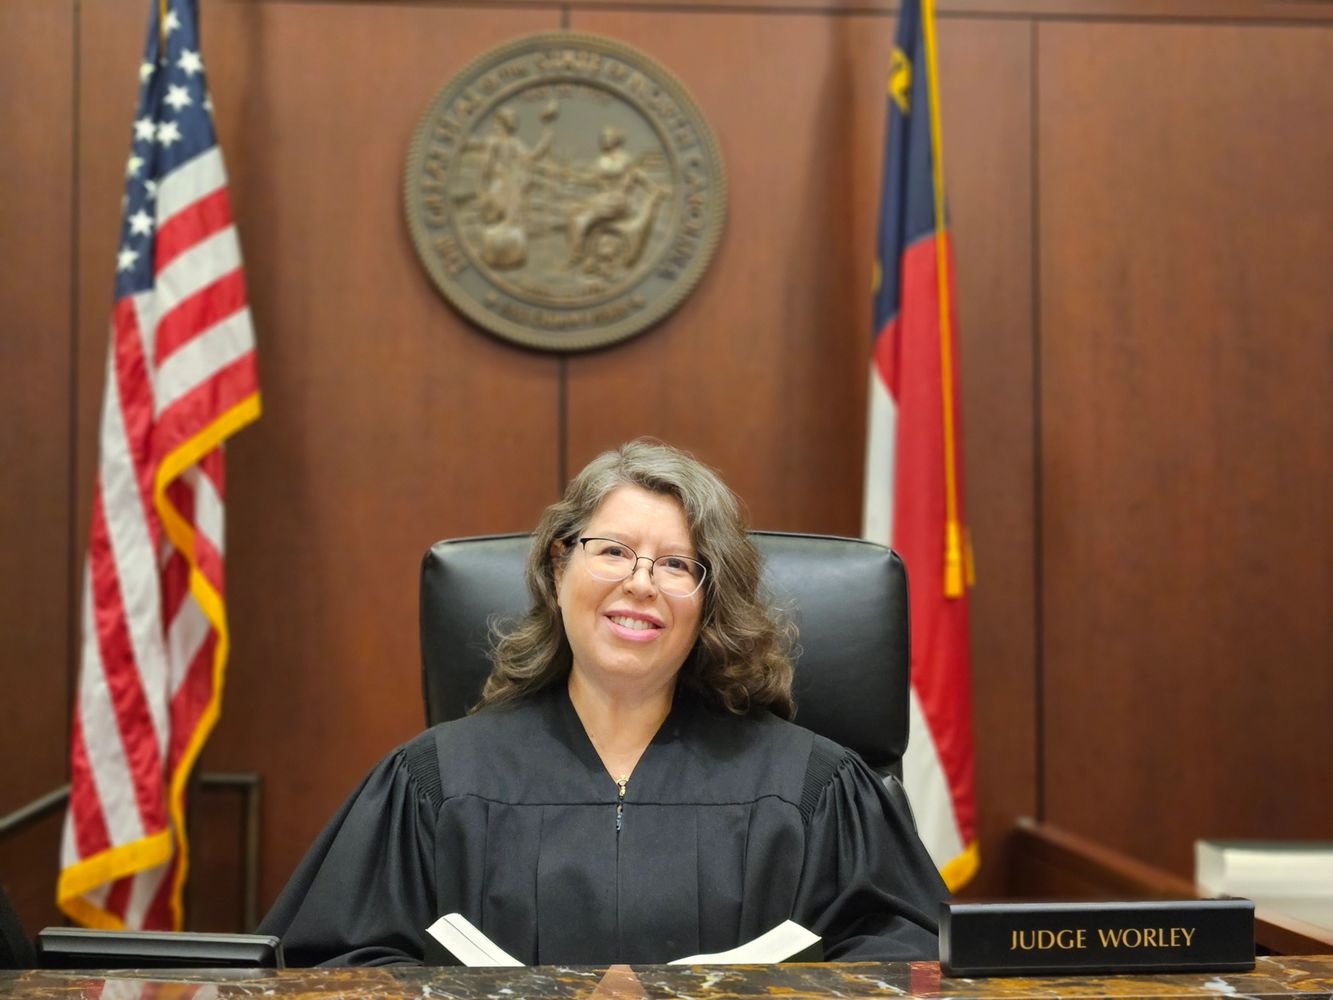 Judge Worley seated at the bench in Wake County